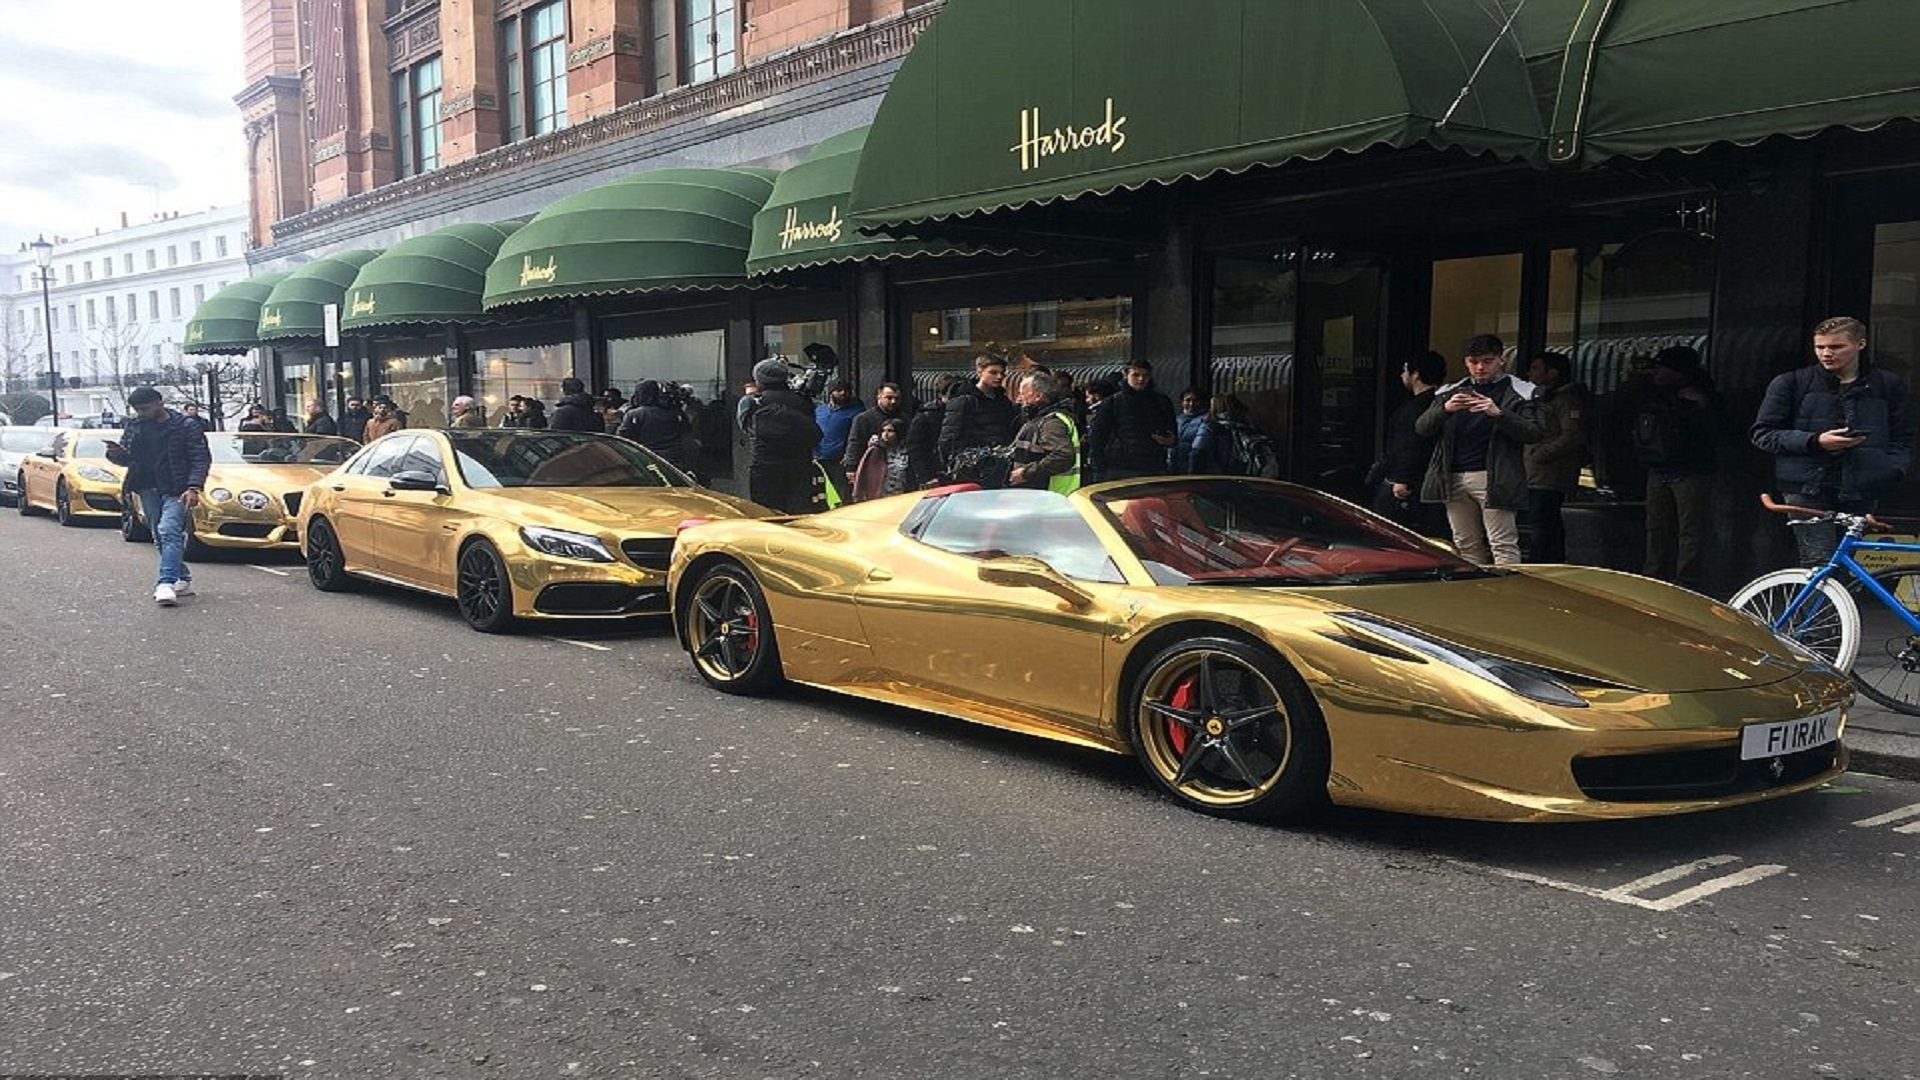 The expensive and Lux car in the World. Luxs London. Expensive gold